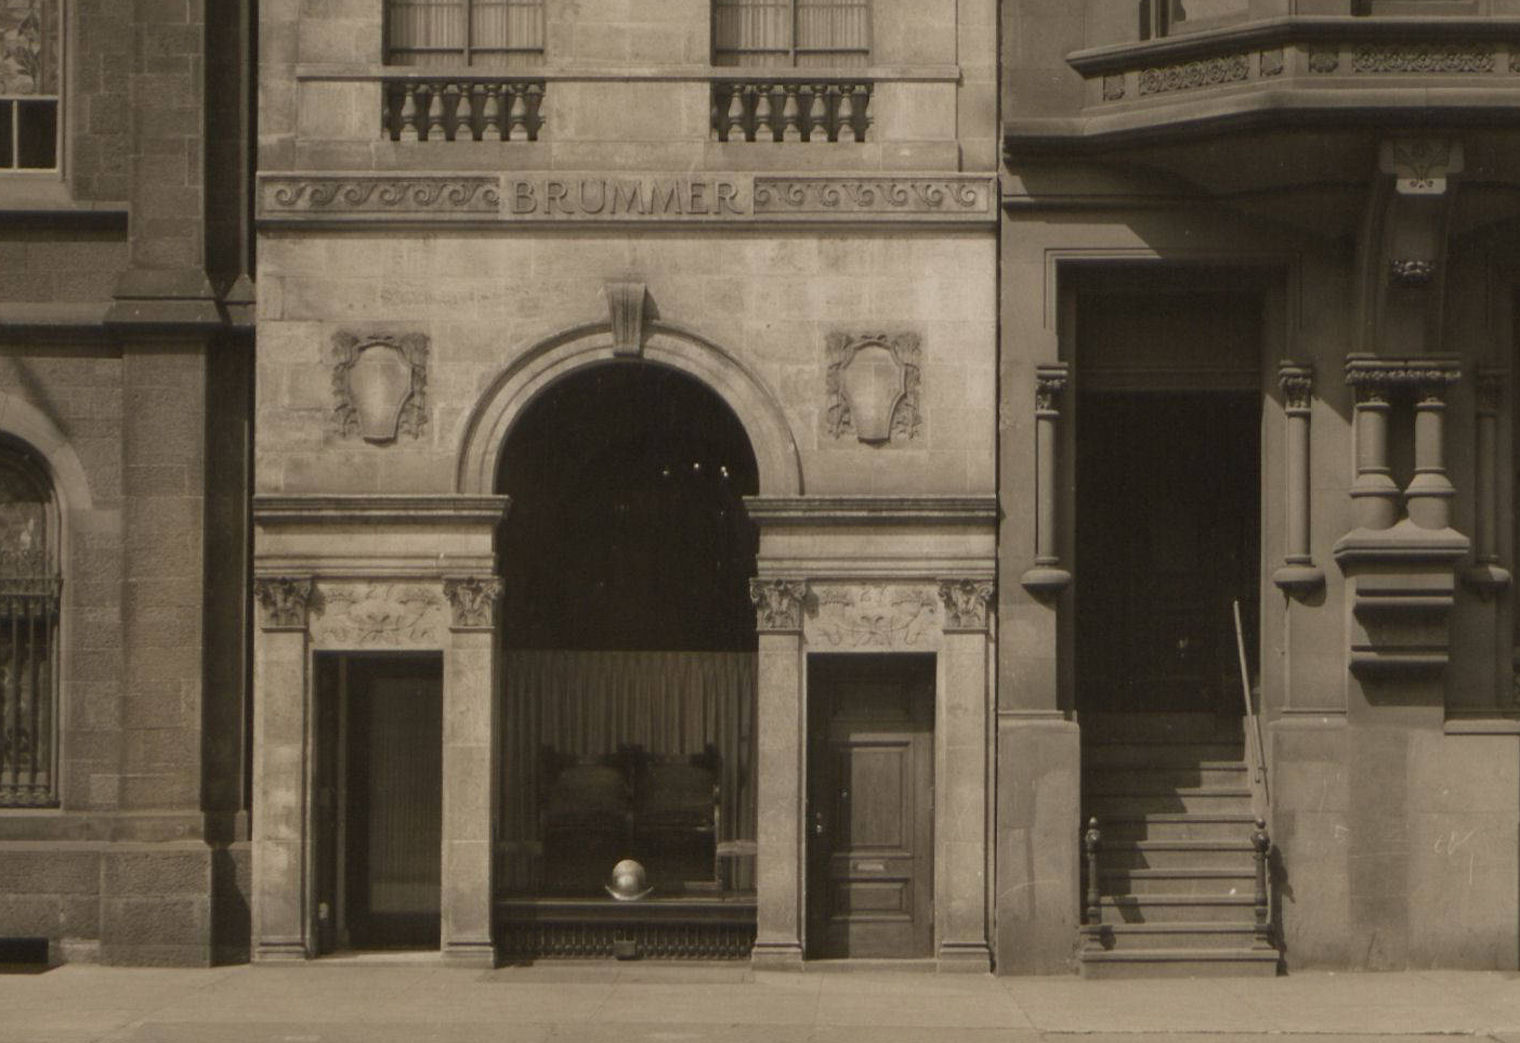 Detail of a photograph of the Brummer Gallery storefront on 57th Street in New York City